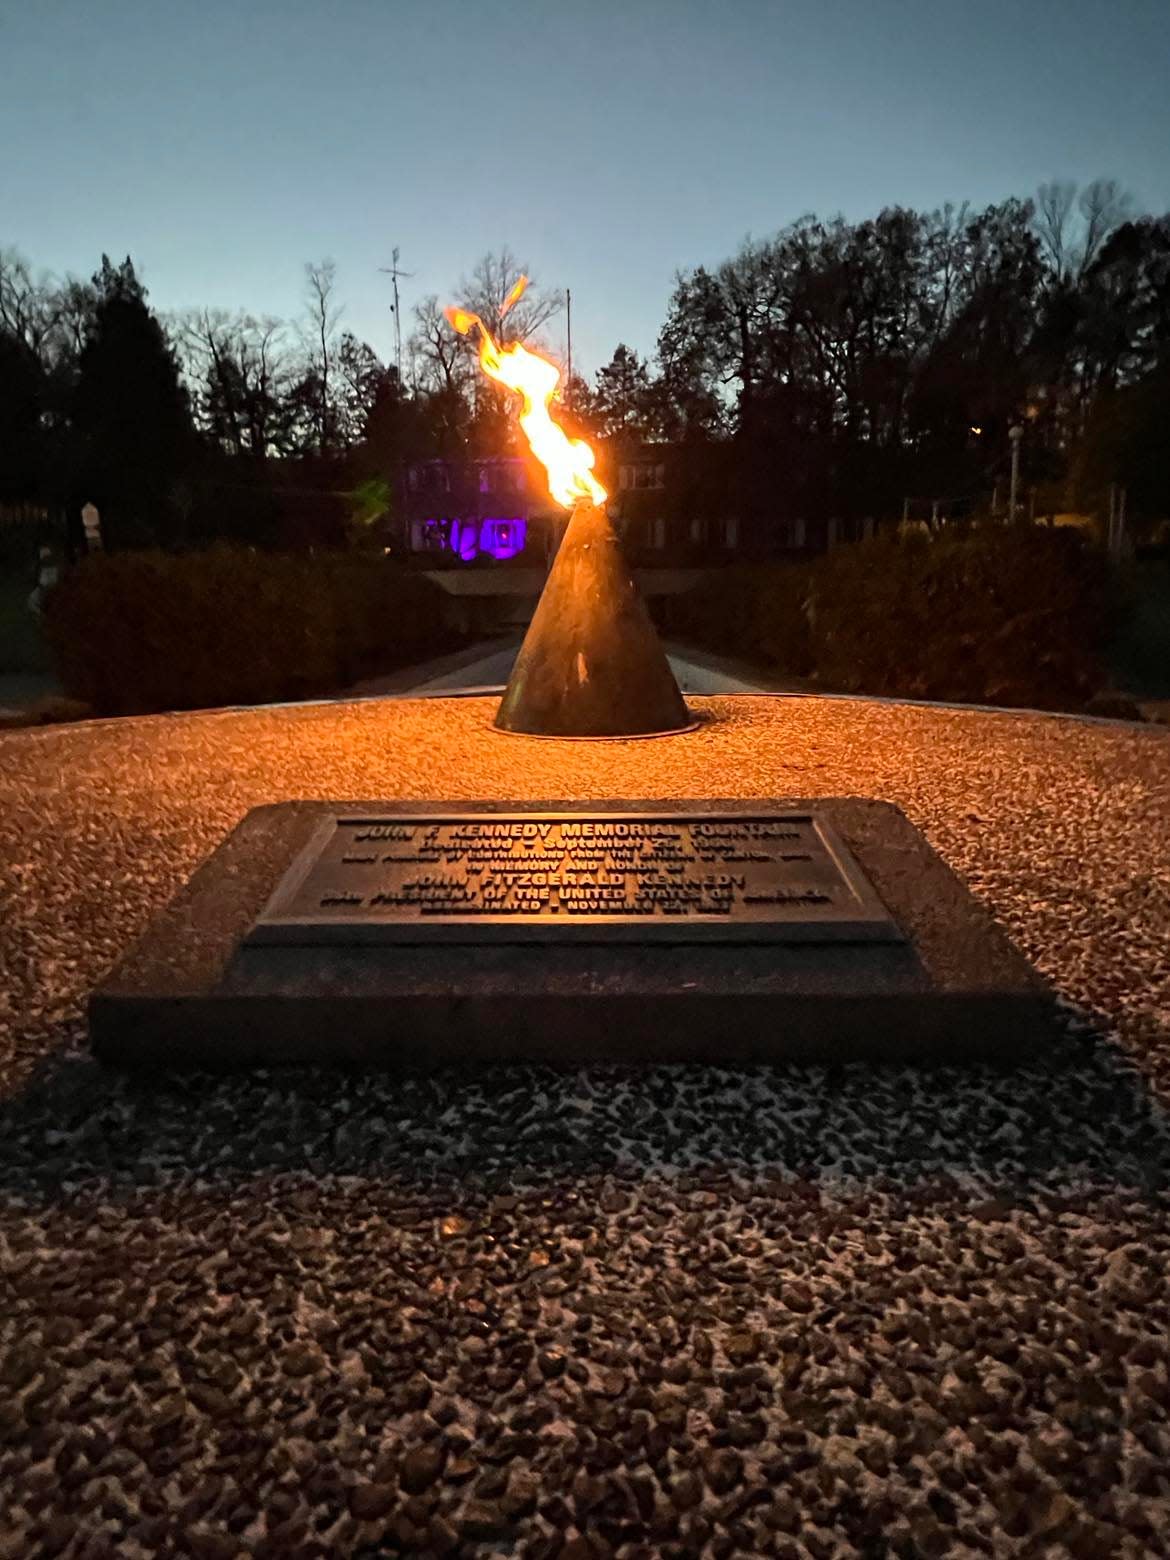 The city of Canton and community dedicated this memorial for President John F. Kennedy in 1966. The eternal flame still burns at Stadium Park as Wednesday marks the 60th anniversary of JFK's assassination.